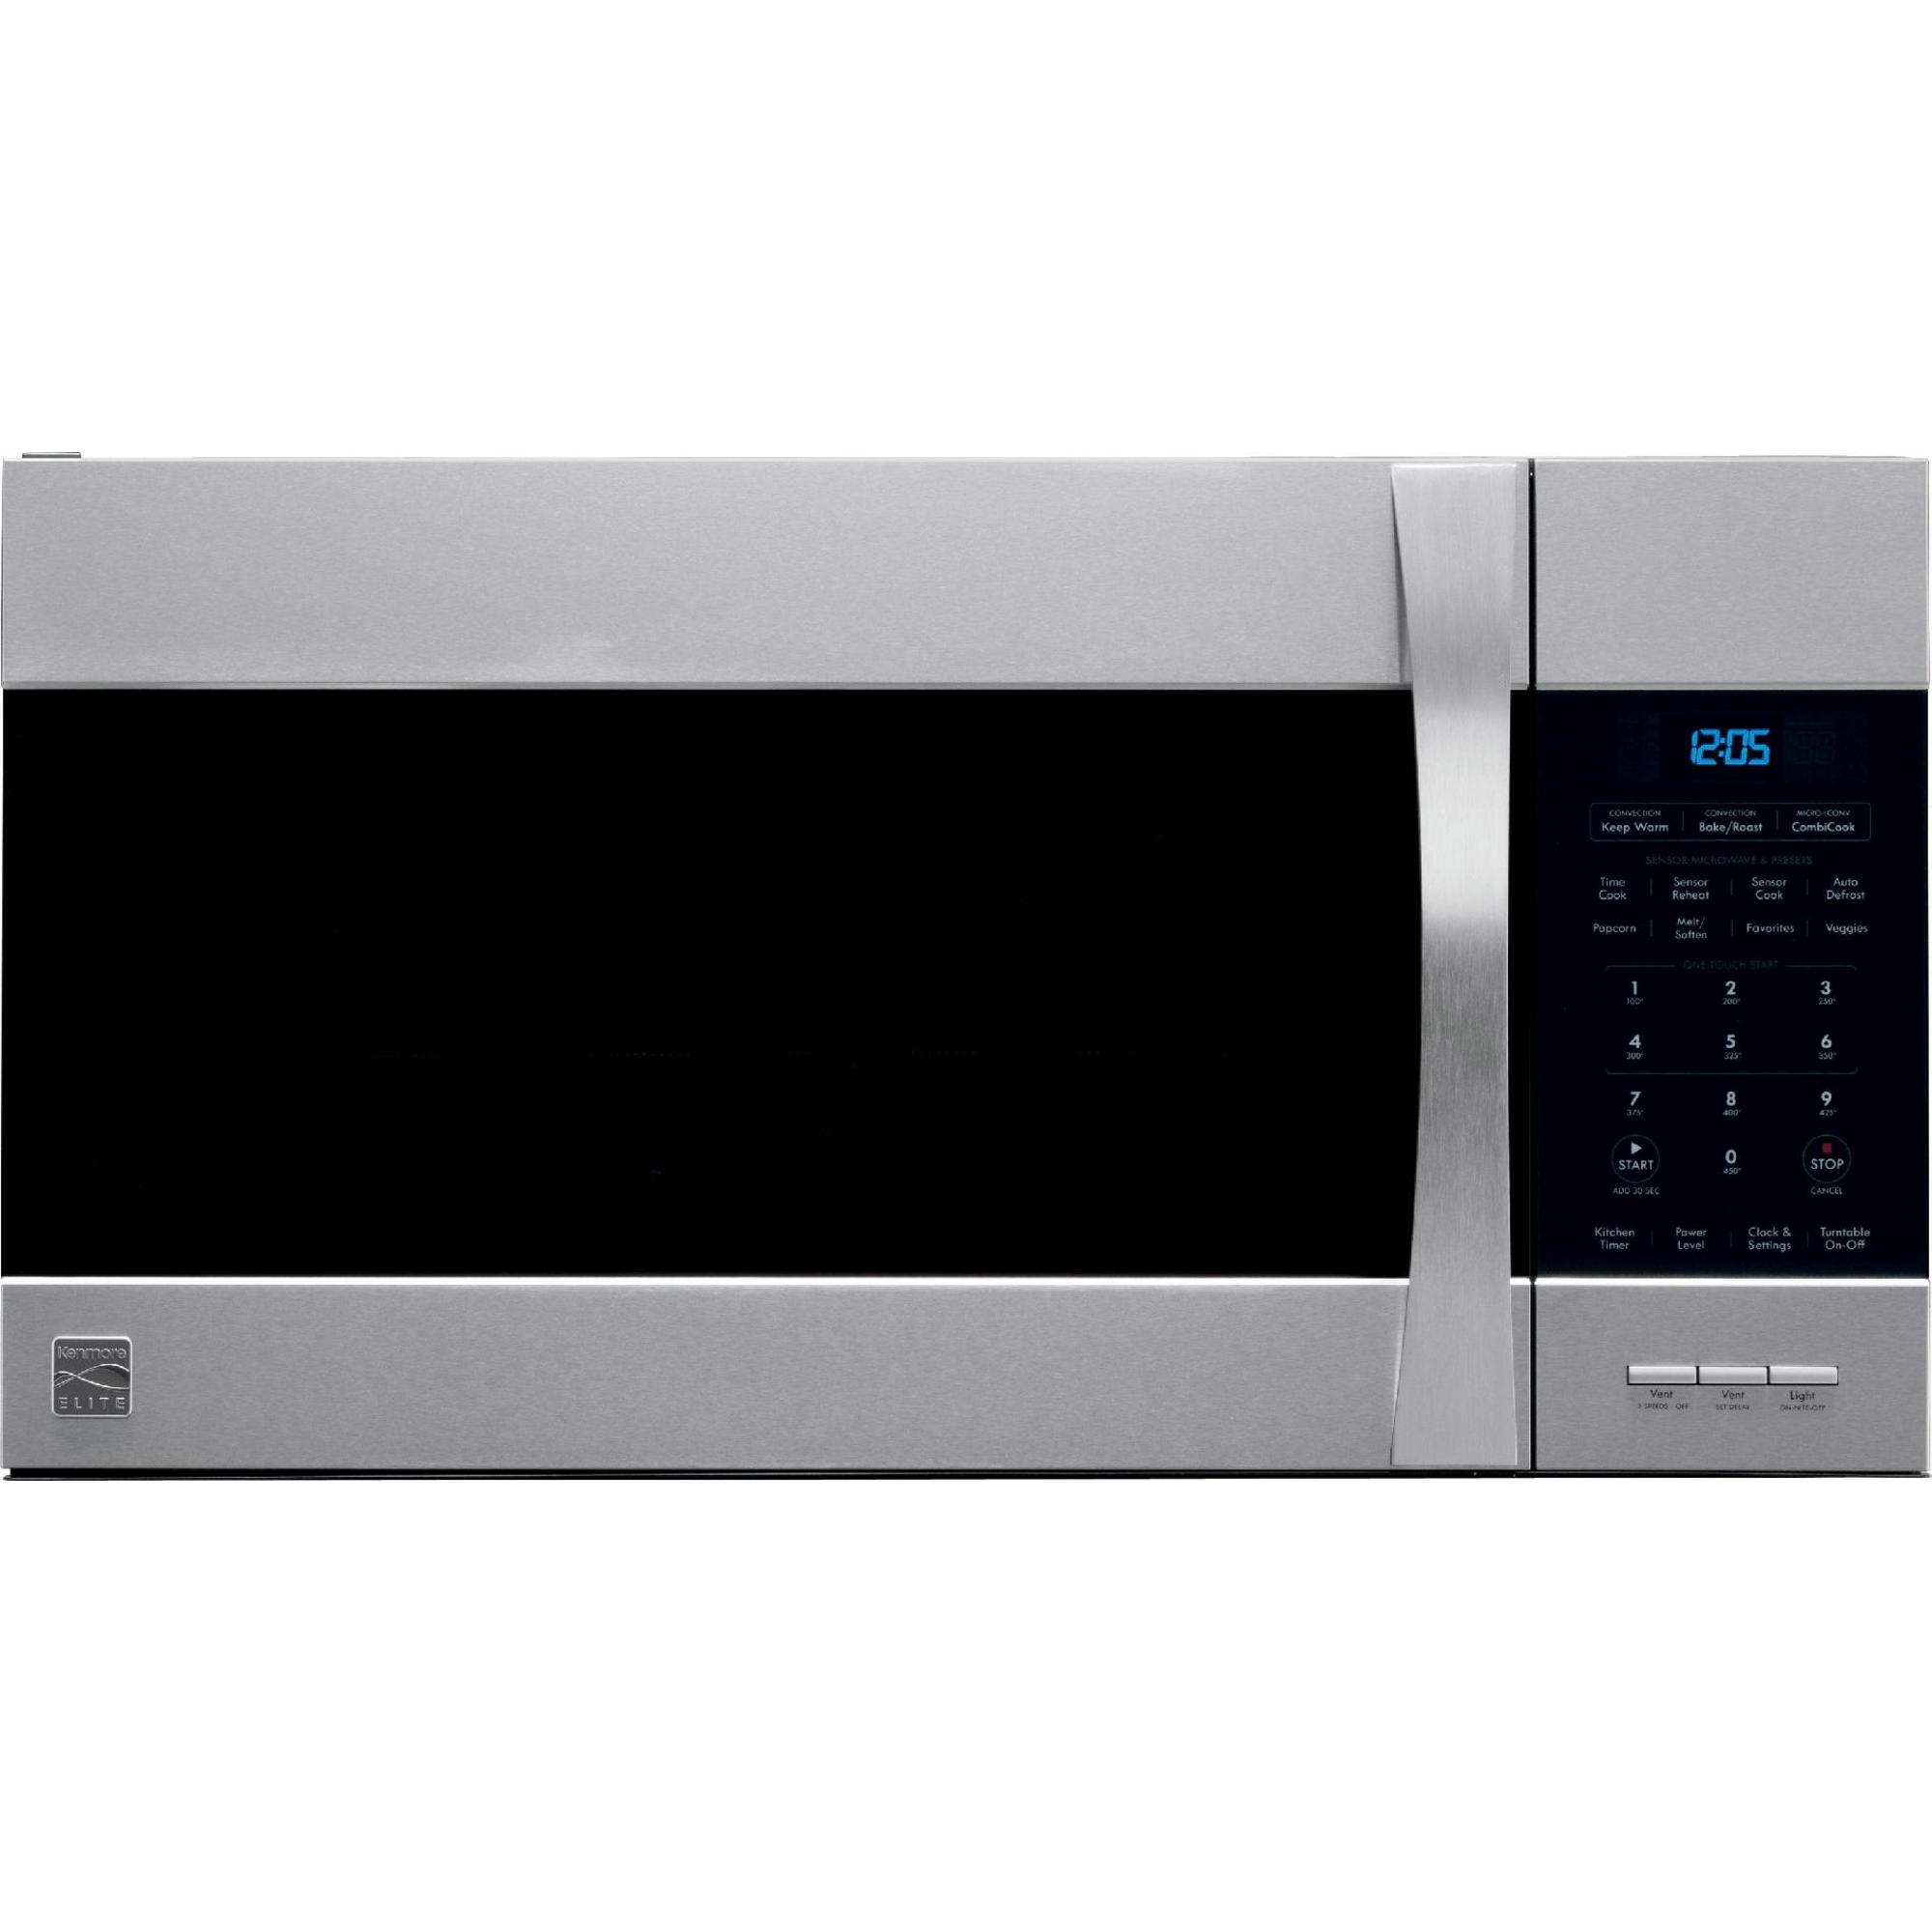 0012505563058 - 80363 1.5 CU. FT. OVER-THE-RANGE CONVECTION MICROWAVE - STAINLESS STEEL